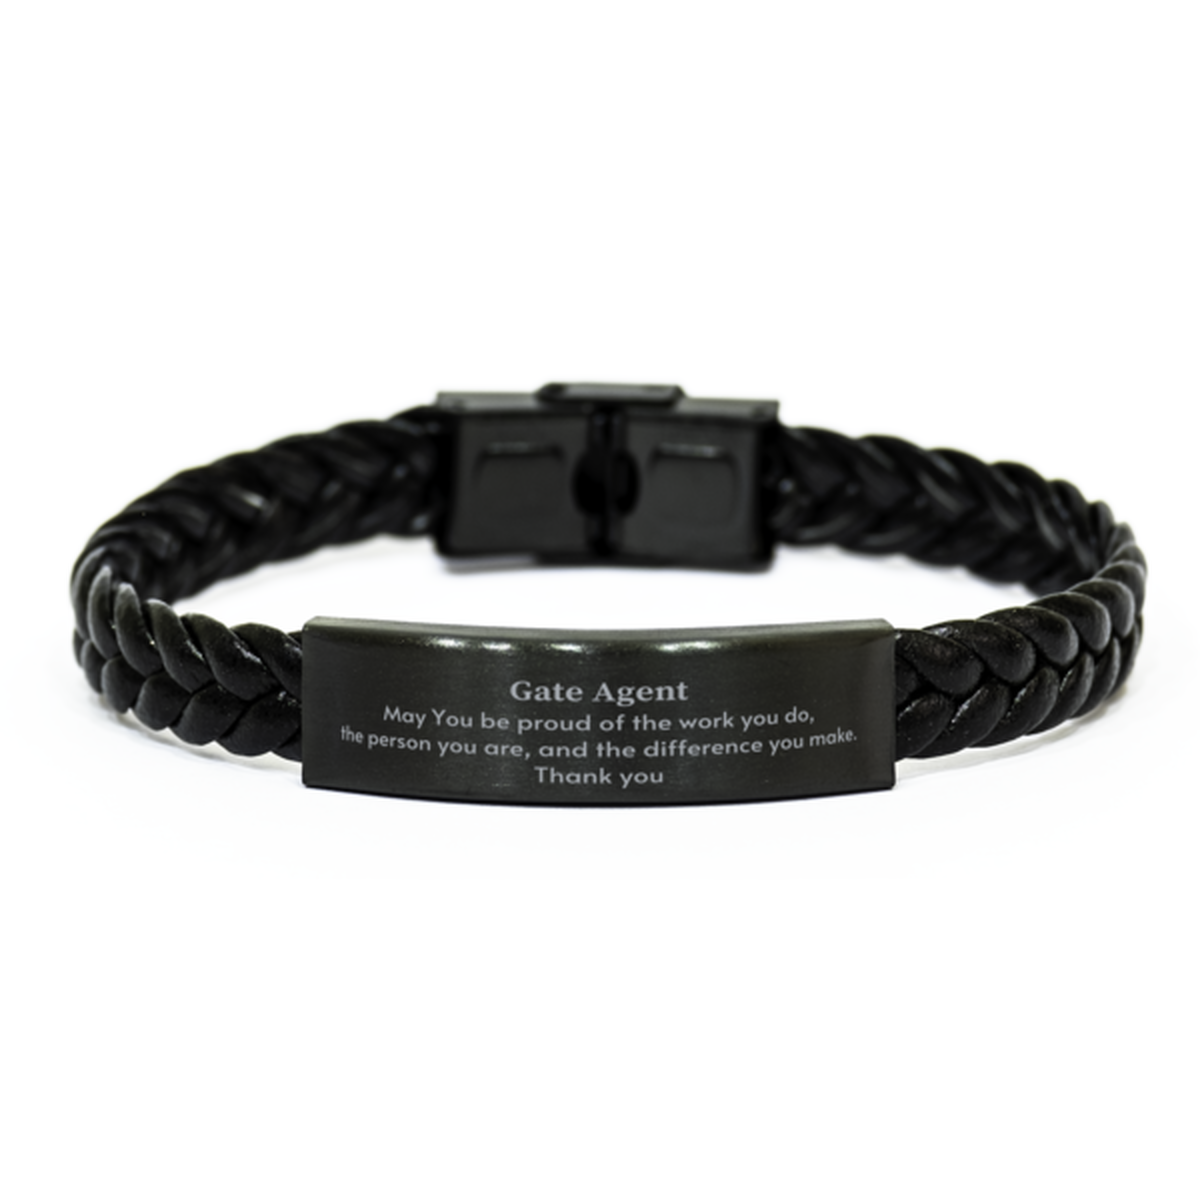 Heartwarming Braided Leather Bracelet Retirement Coworkers Gifts for Gate Agent, Gate Agent May You be proud of the work you do, the person you are Gifts for Boss Men Women Friends